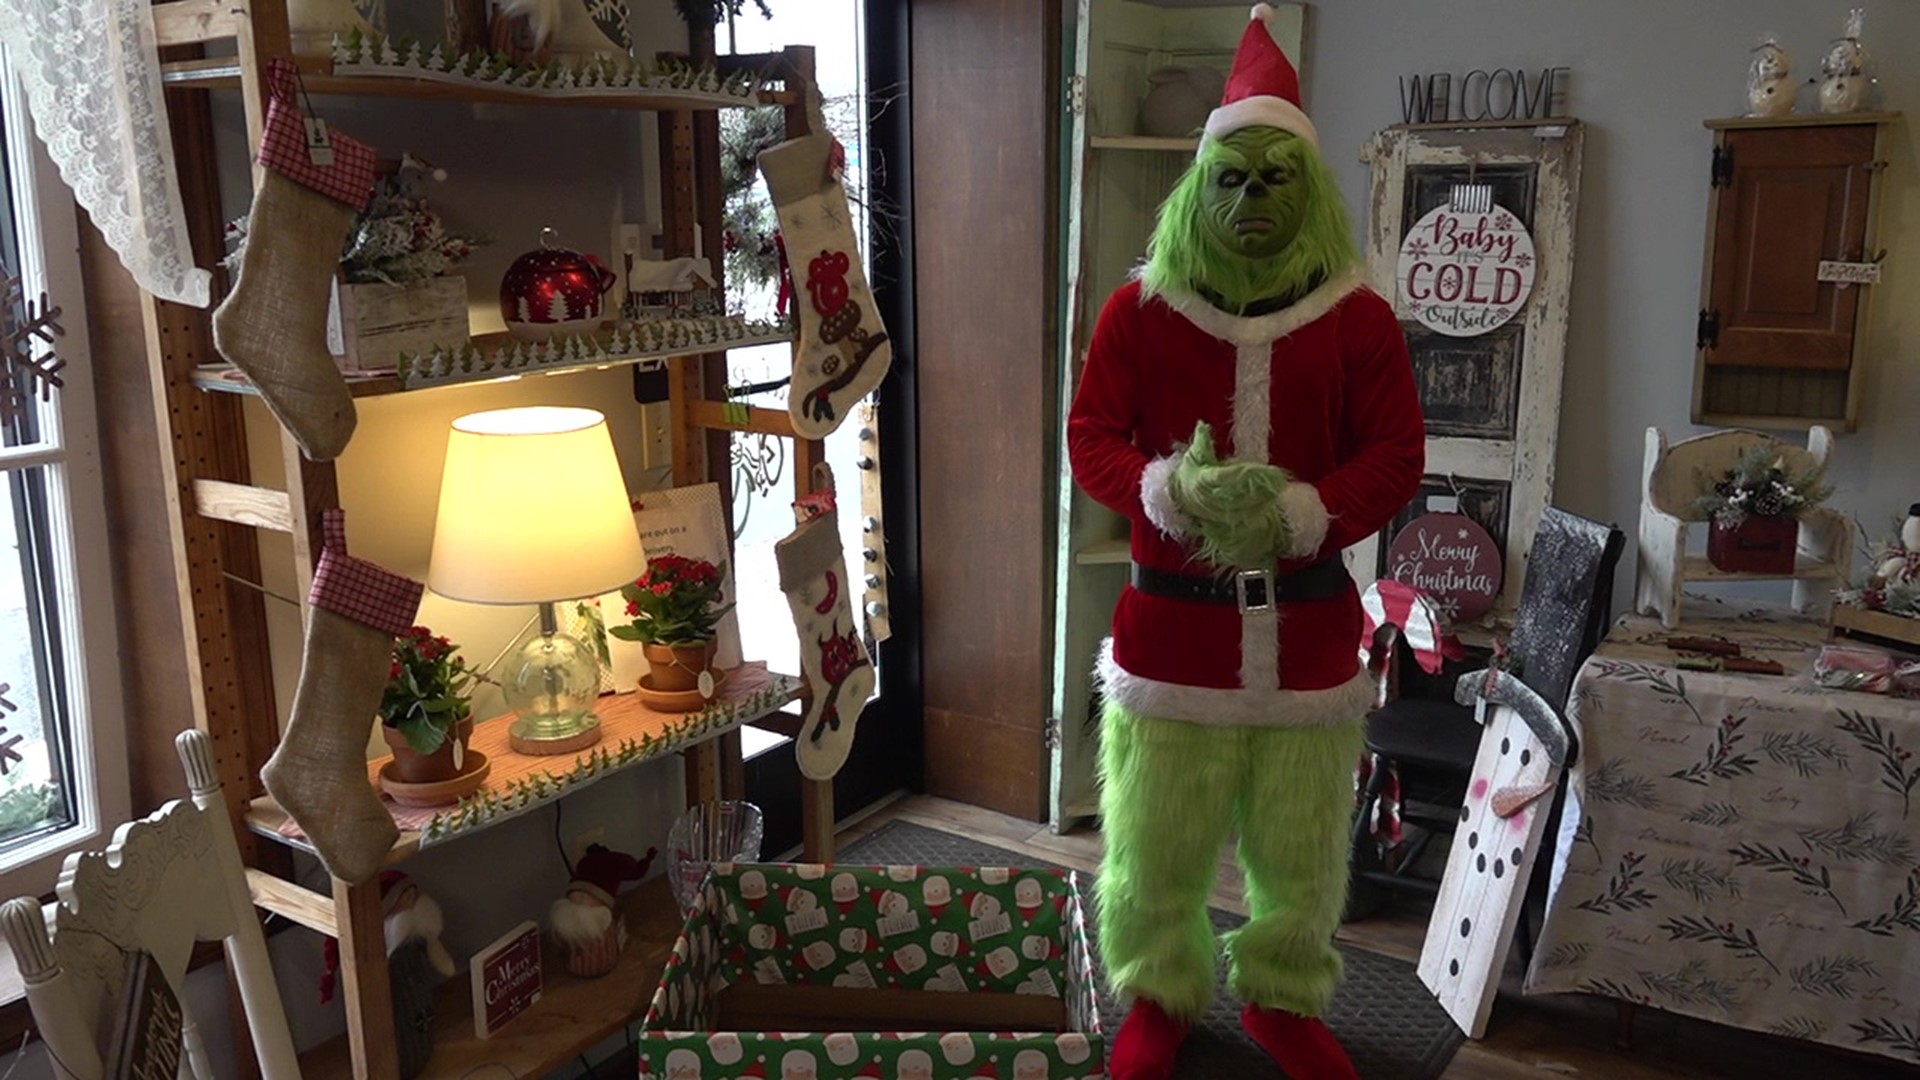 The Grinch of Schuylkill County has returned. But this Grinch isn't looking to steal Christmas at all, but rather give Christmas to kids in need.